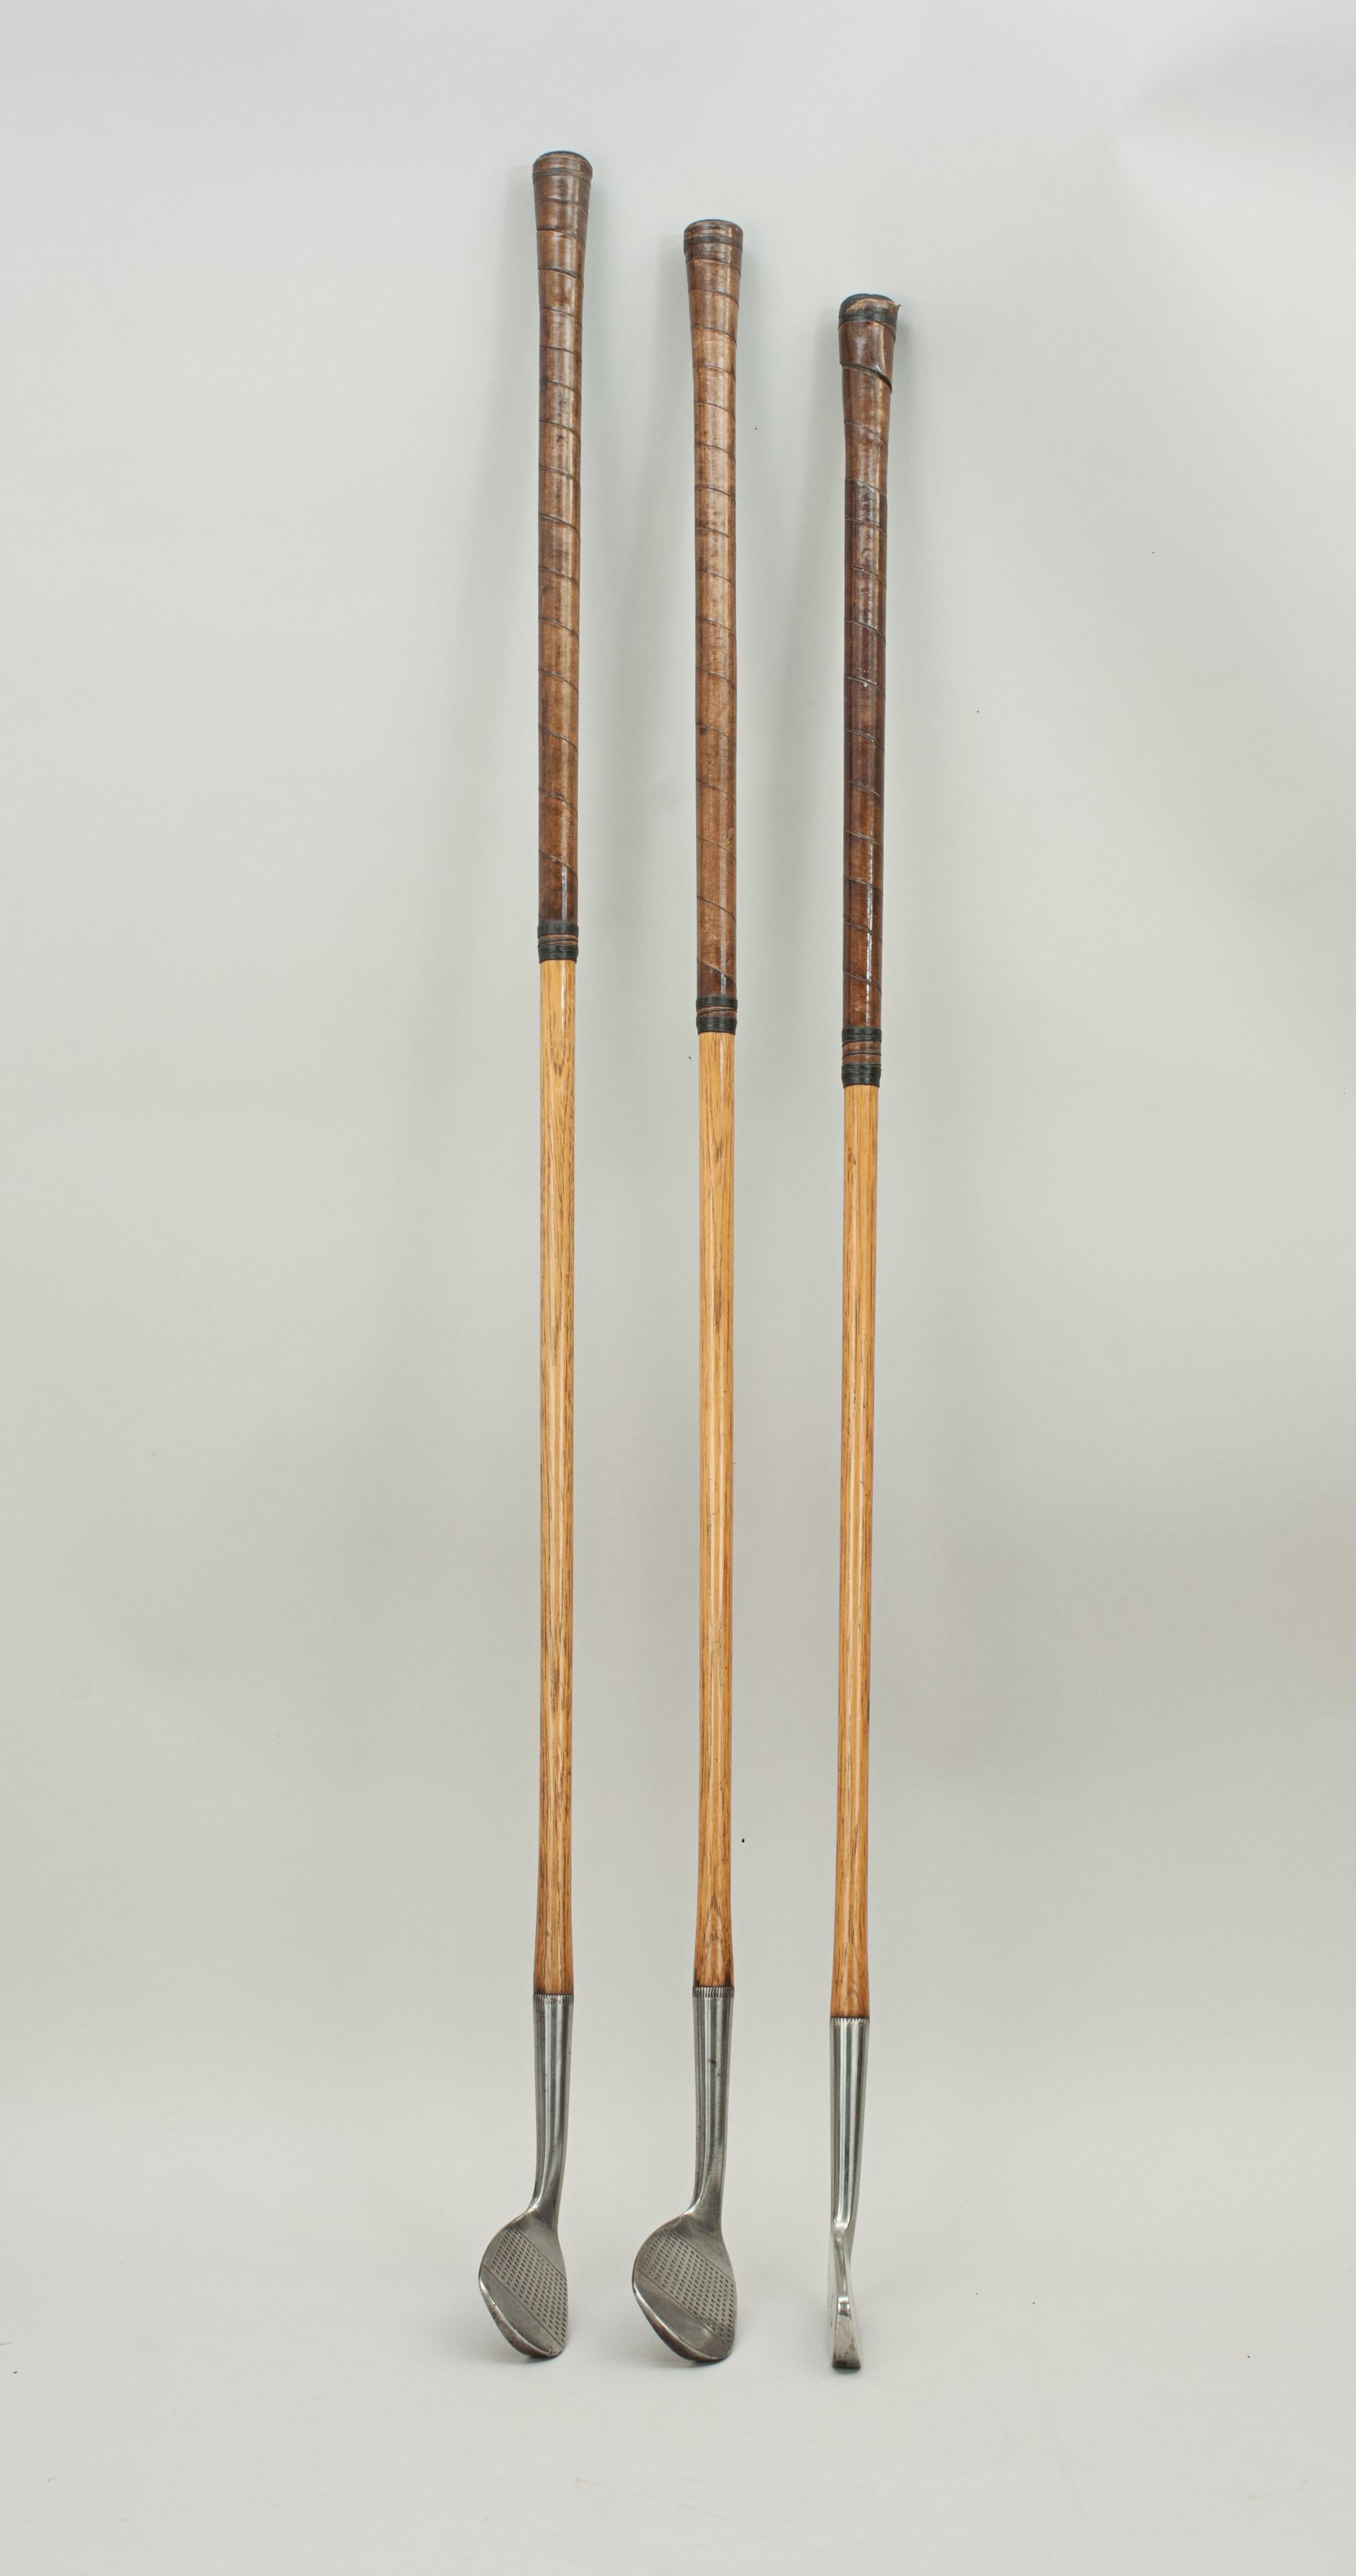 Set Of Three Gibson Hickory Golf Clubs, The Civic Model.
Three playable hickory shafted golf clubs by Gibson of Kinghorn, Fife, 'The Civic Model'. The Mashie, Mashie-Niblick and Putter are all marked 